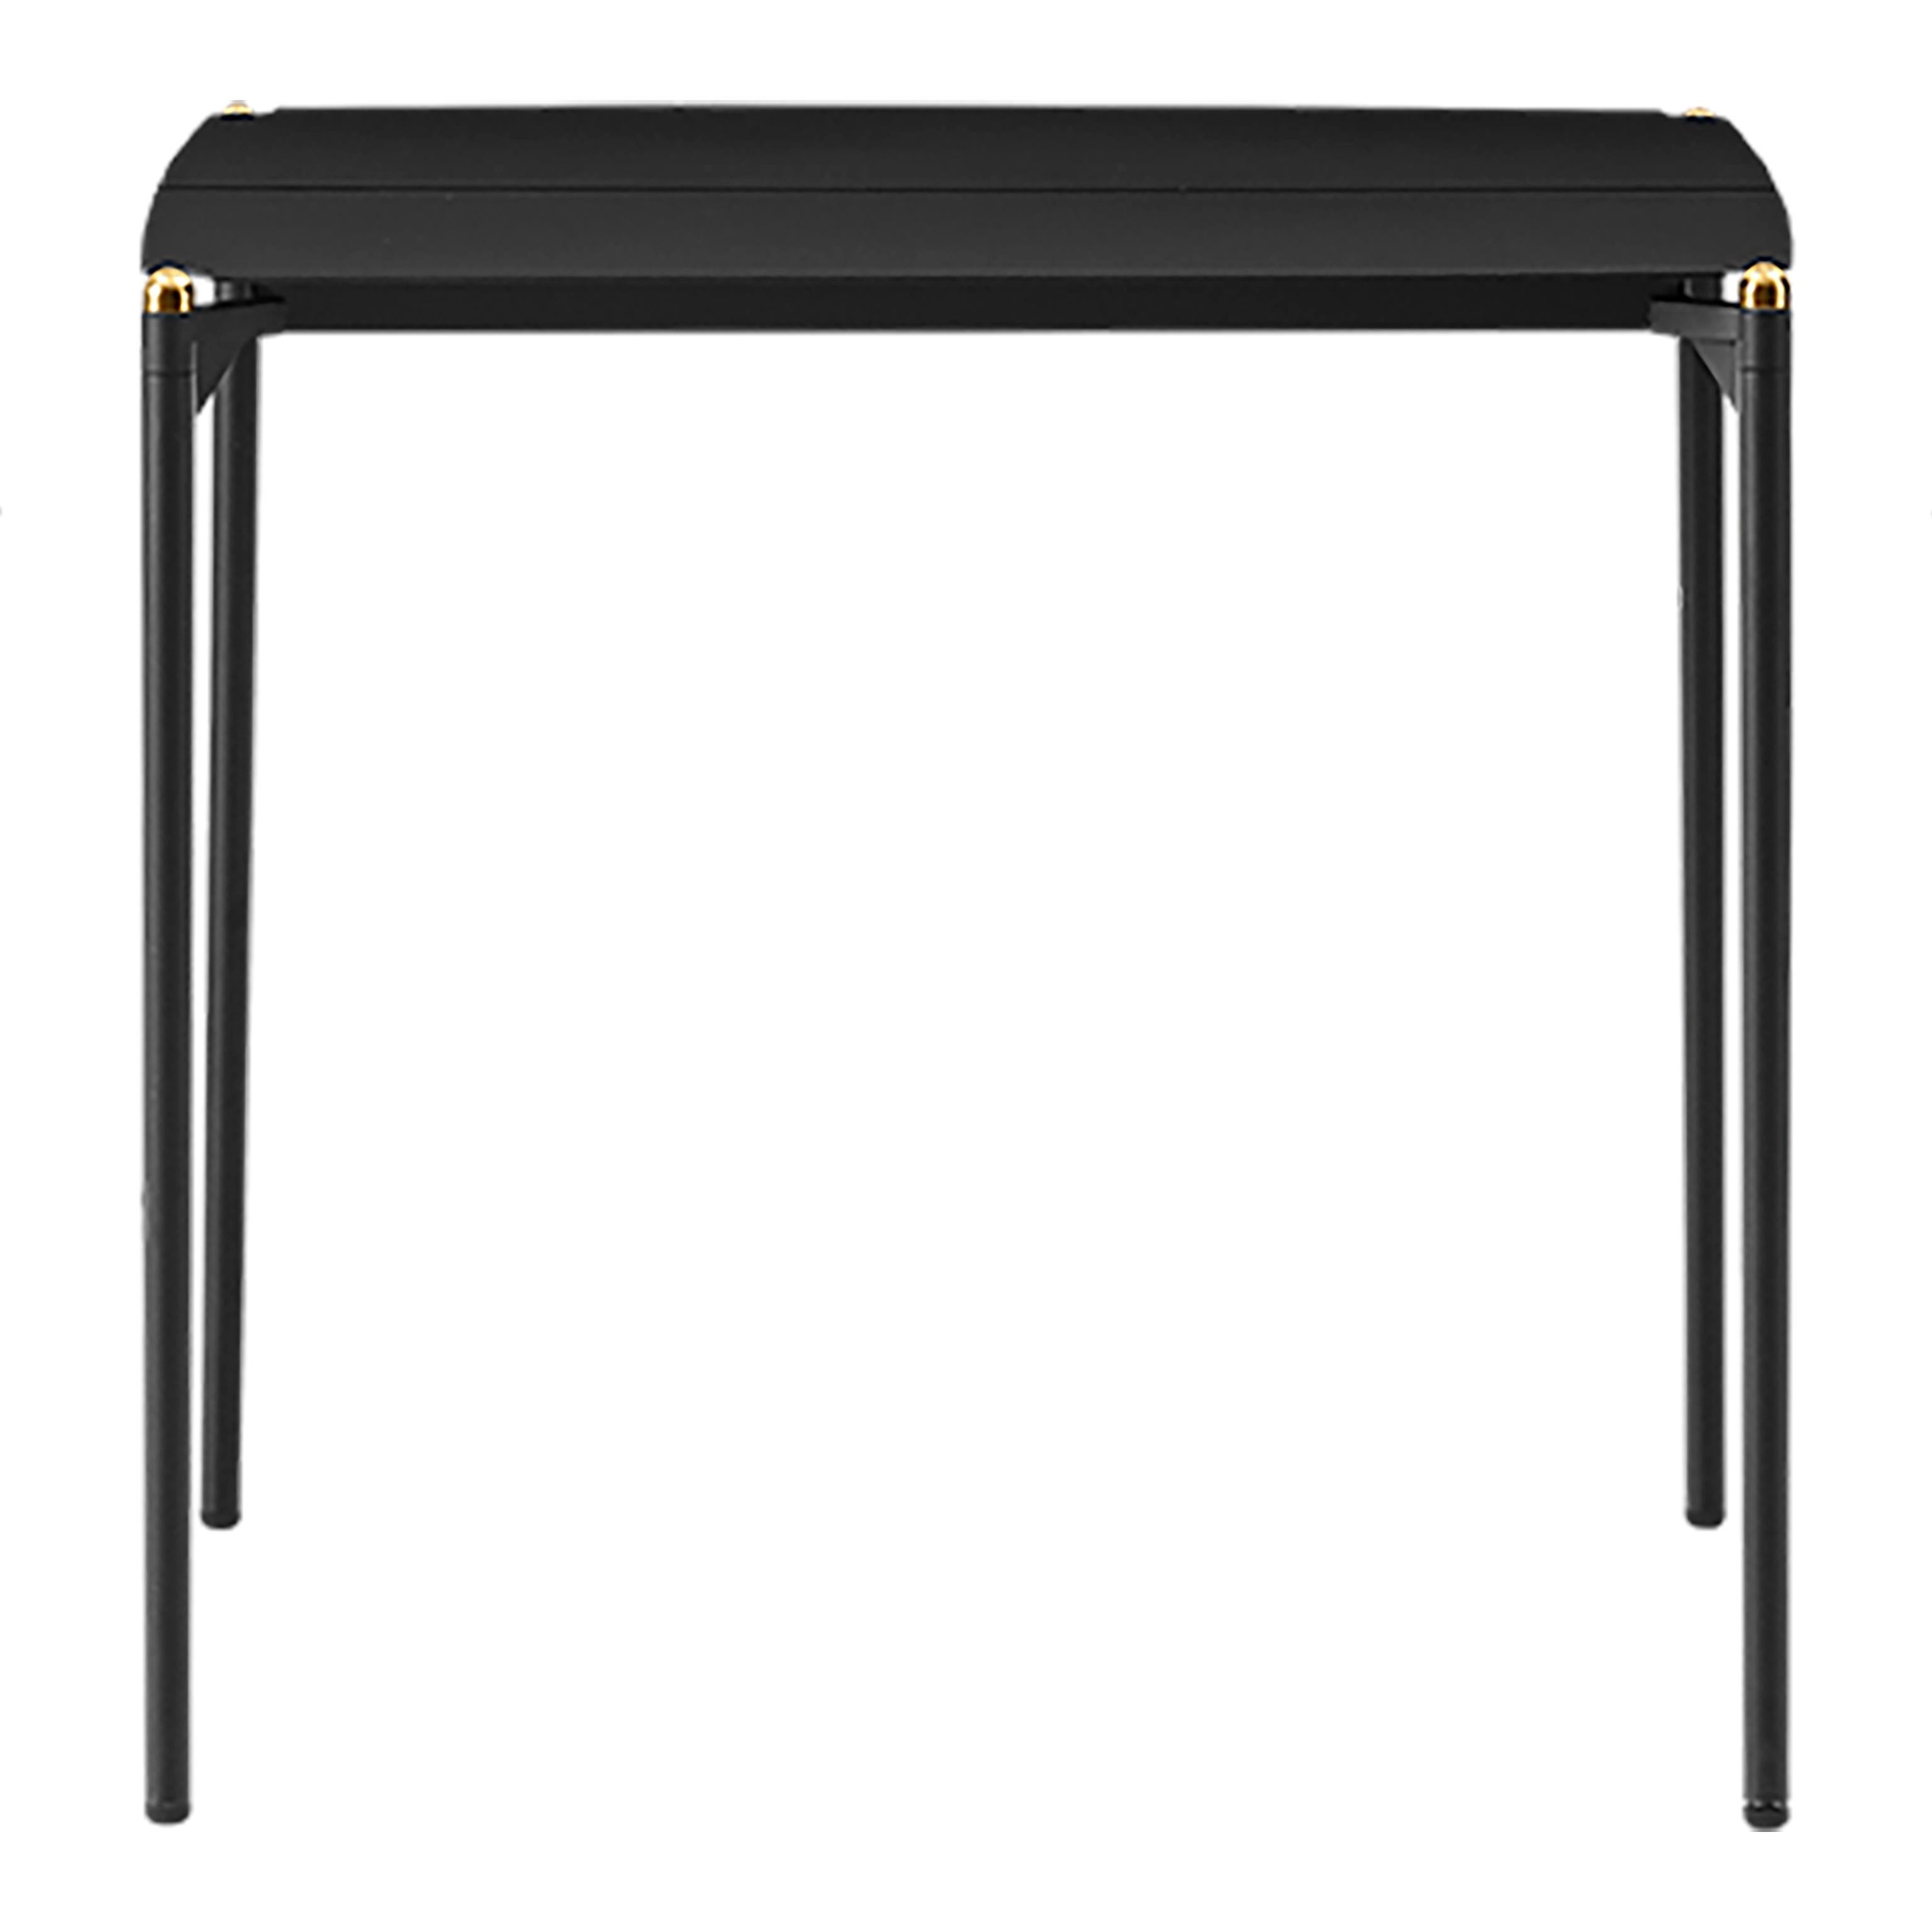 Small black and gold minimalist table
Dimensions: D 80 x W 80 x H 72 cm 
Materials: Steel w. Matte powder coating, aluminum w. Matte powder coating & stainless steel w. Gold titanium plating.
Available in colors: Taupe, bordeaux, forest, ginger